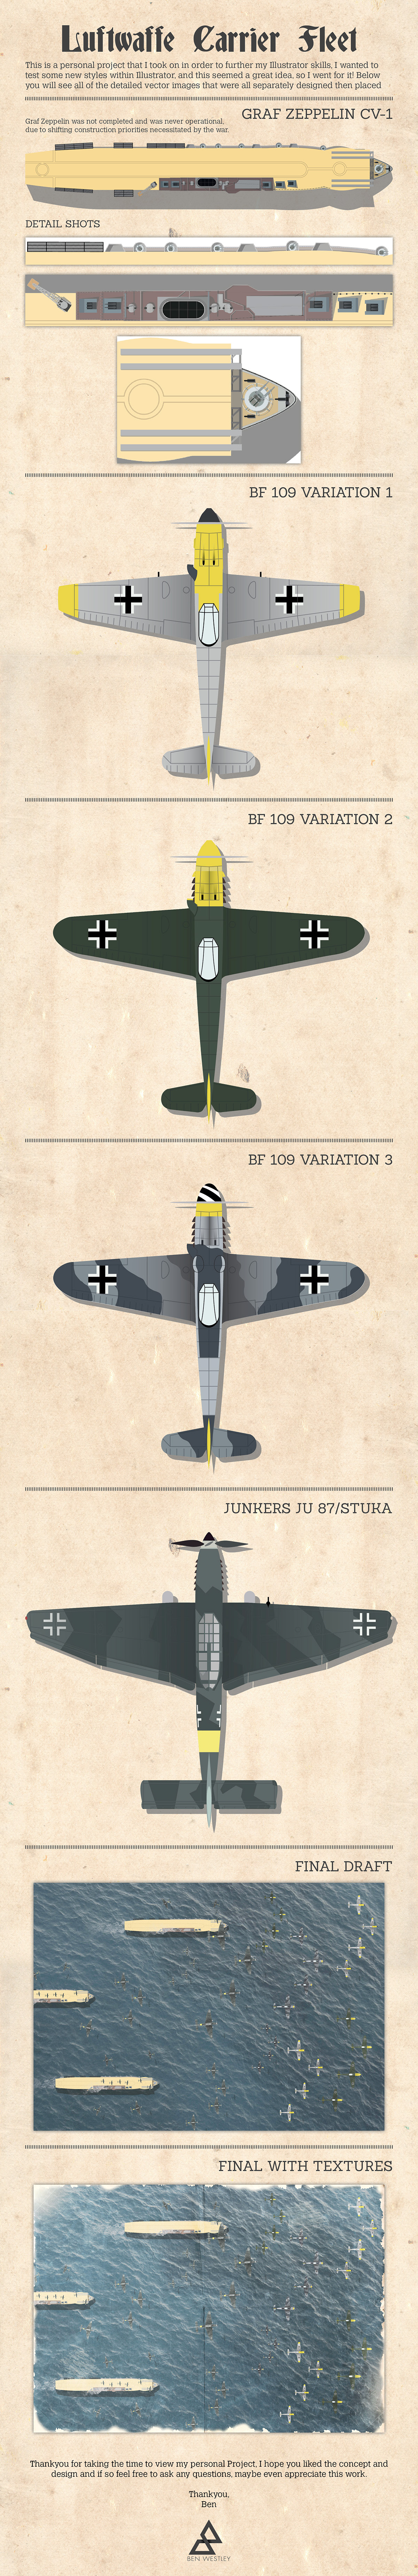 ww2 World war 2 war thunder planes fleet Aircraft Carrier Illustrator vector textured germany Rotherham Barnsley aerial view DKNG style vintage style photo